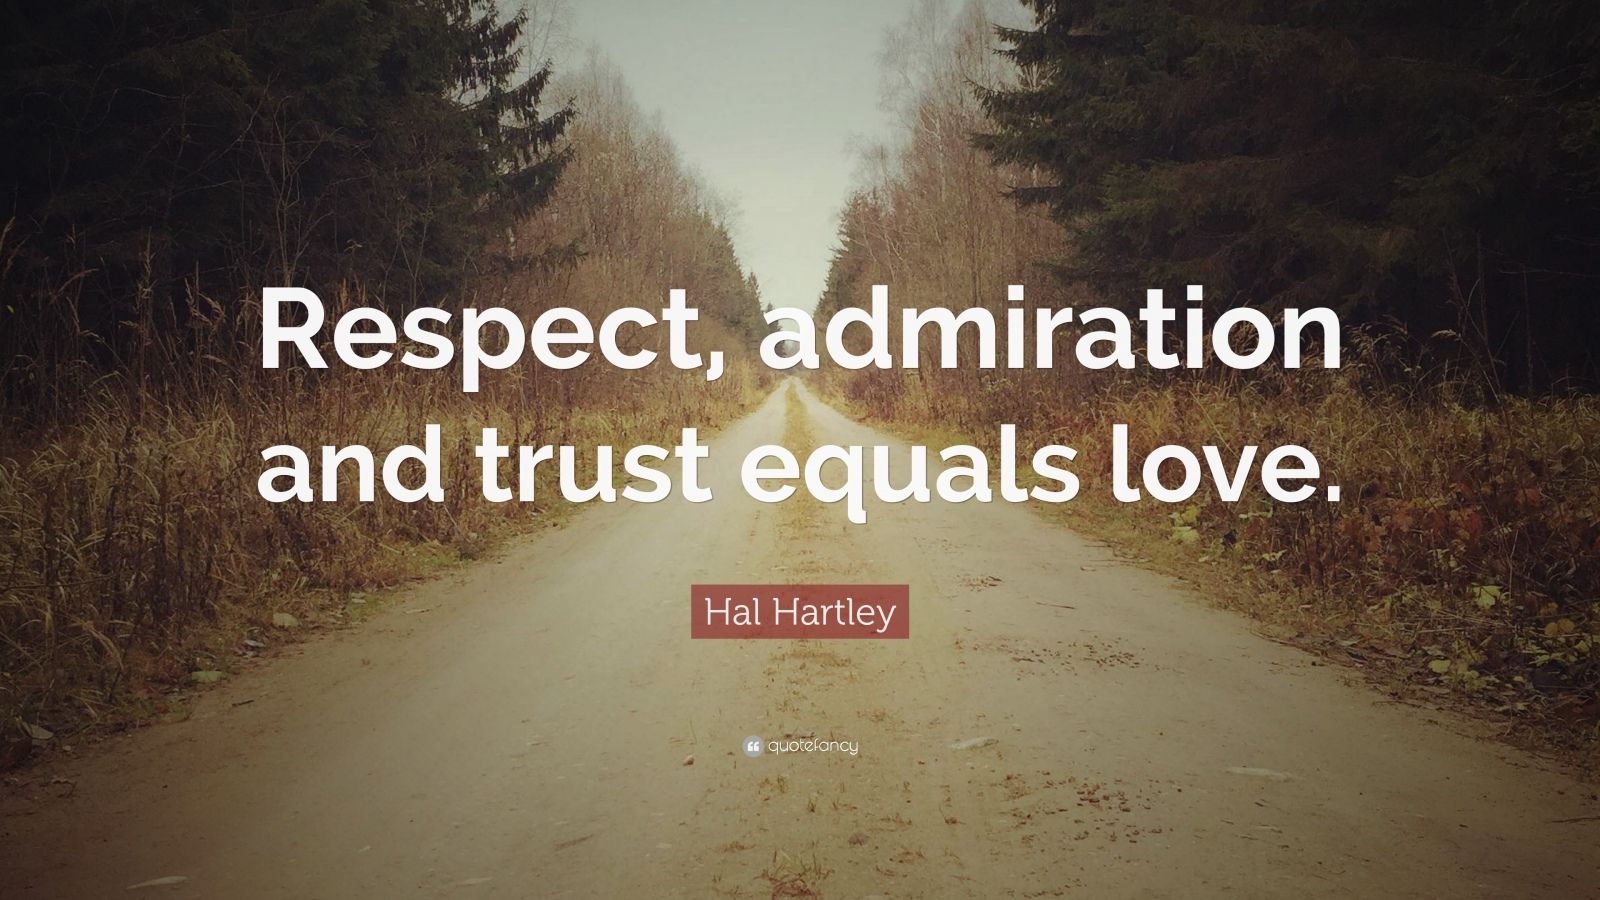 Hal Hartley Quote: “Respect, admiration and trust equals love.” (12 ...